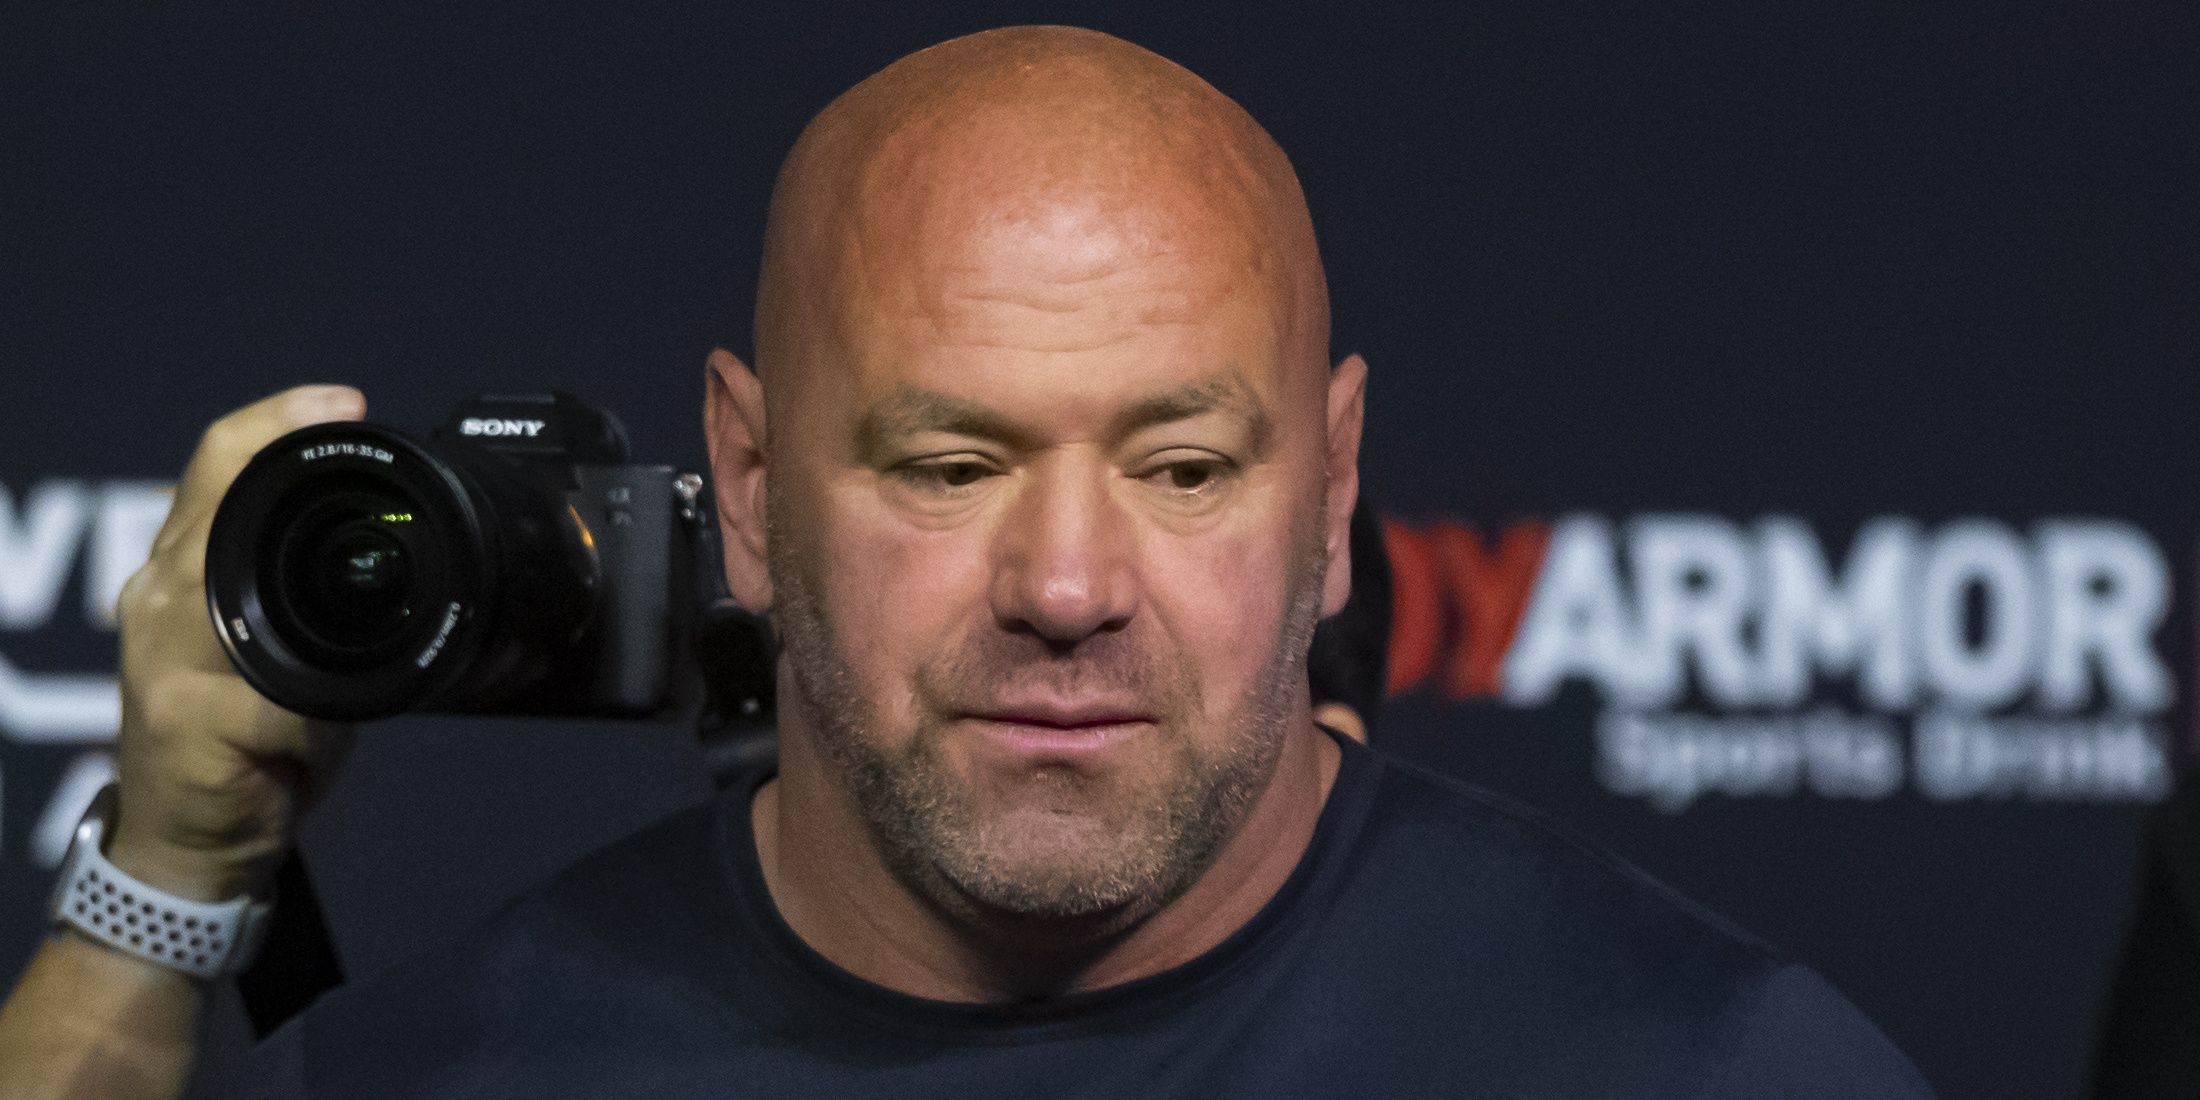 Dana White at a UFC weigh-in Cropped